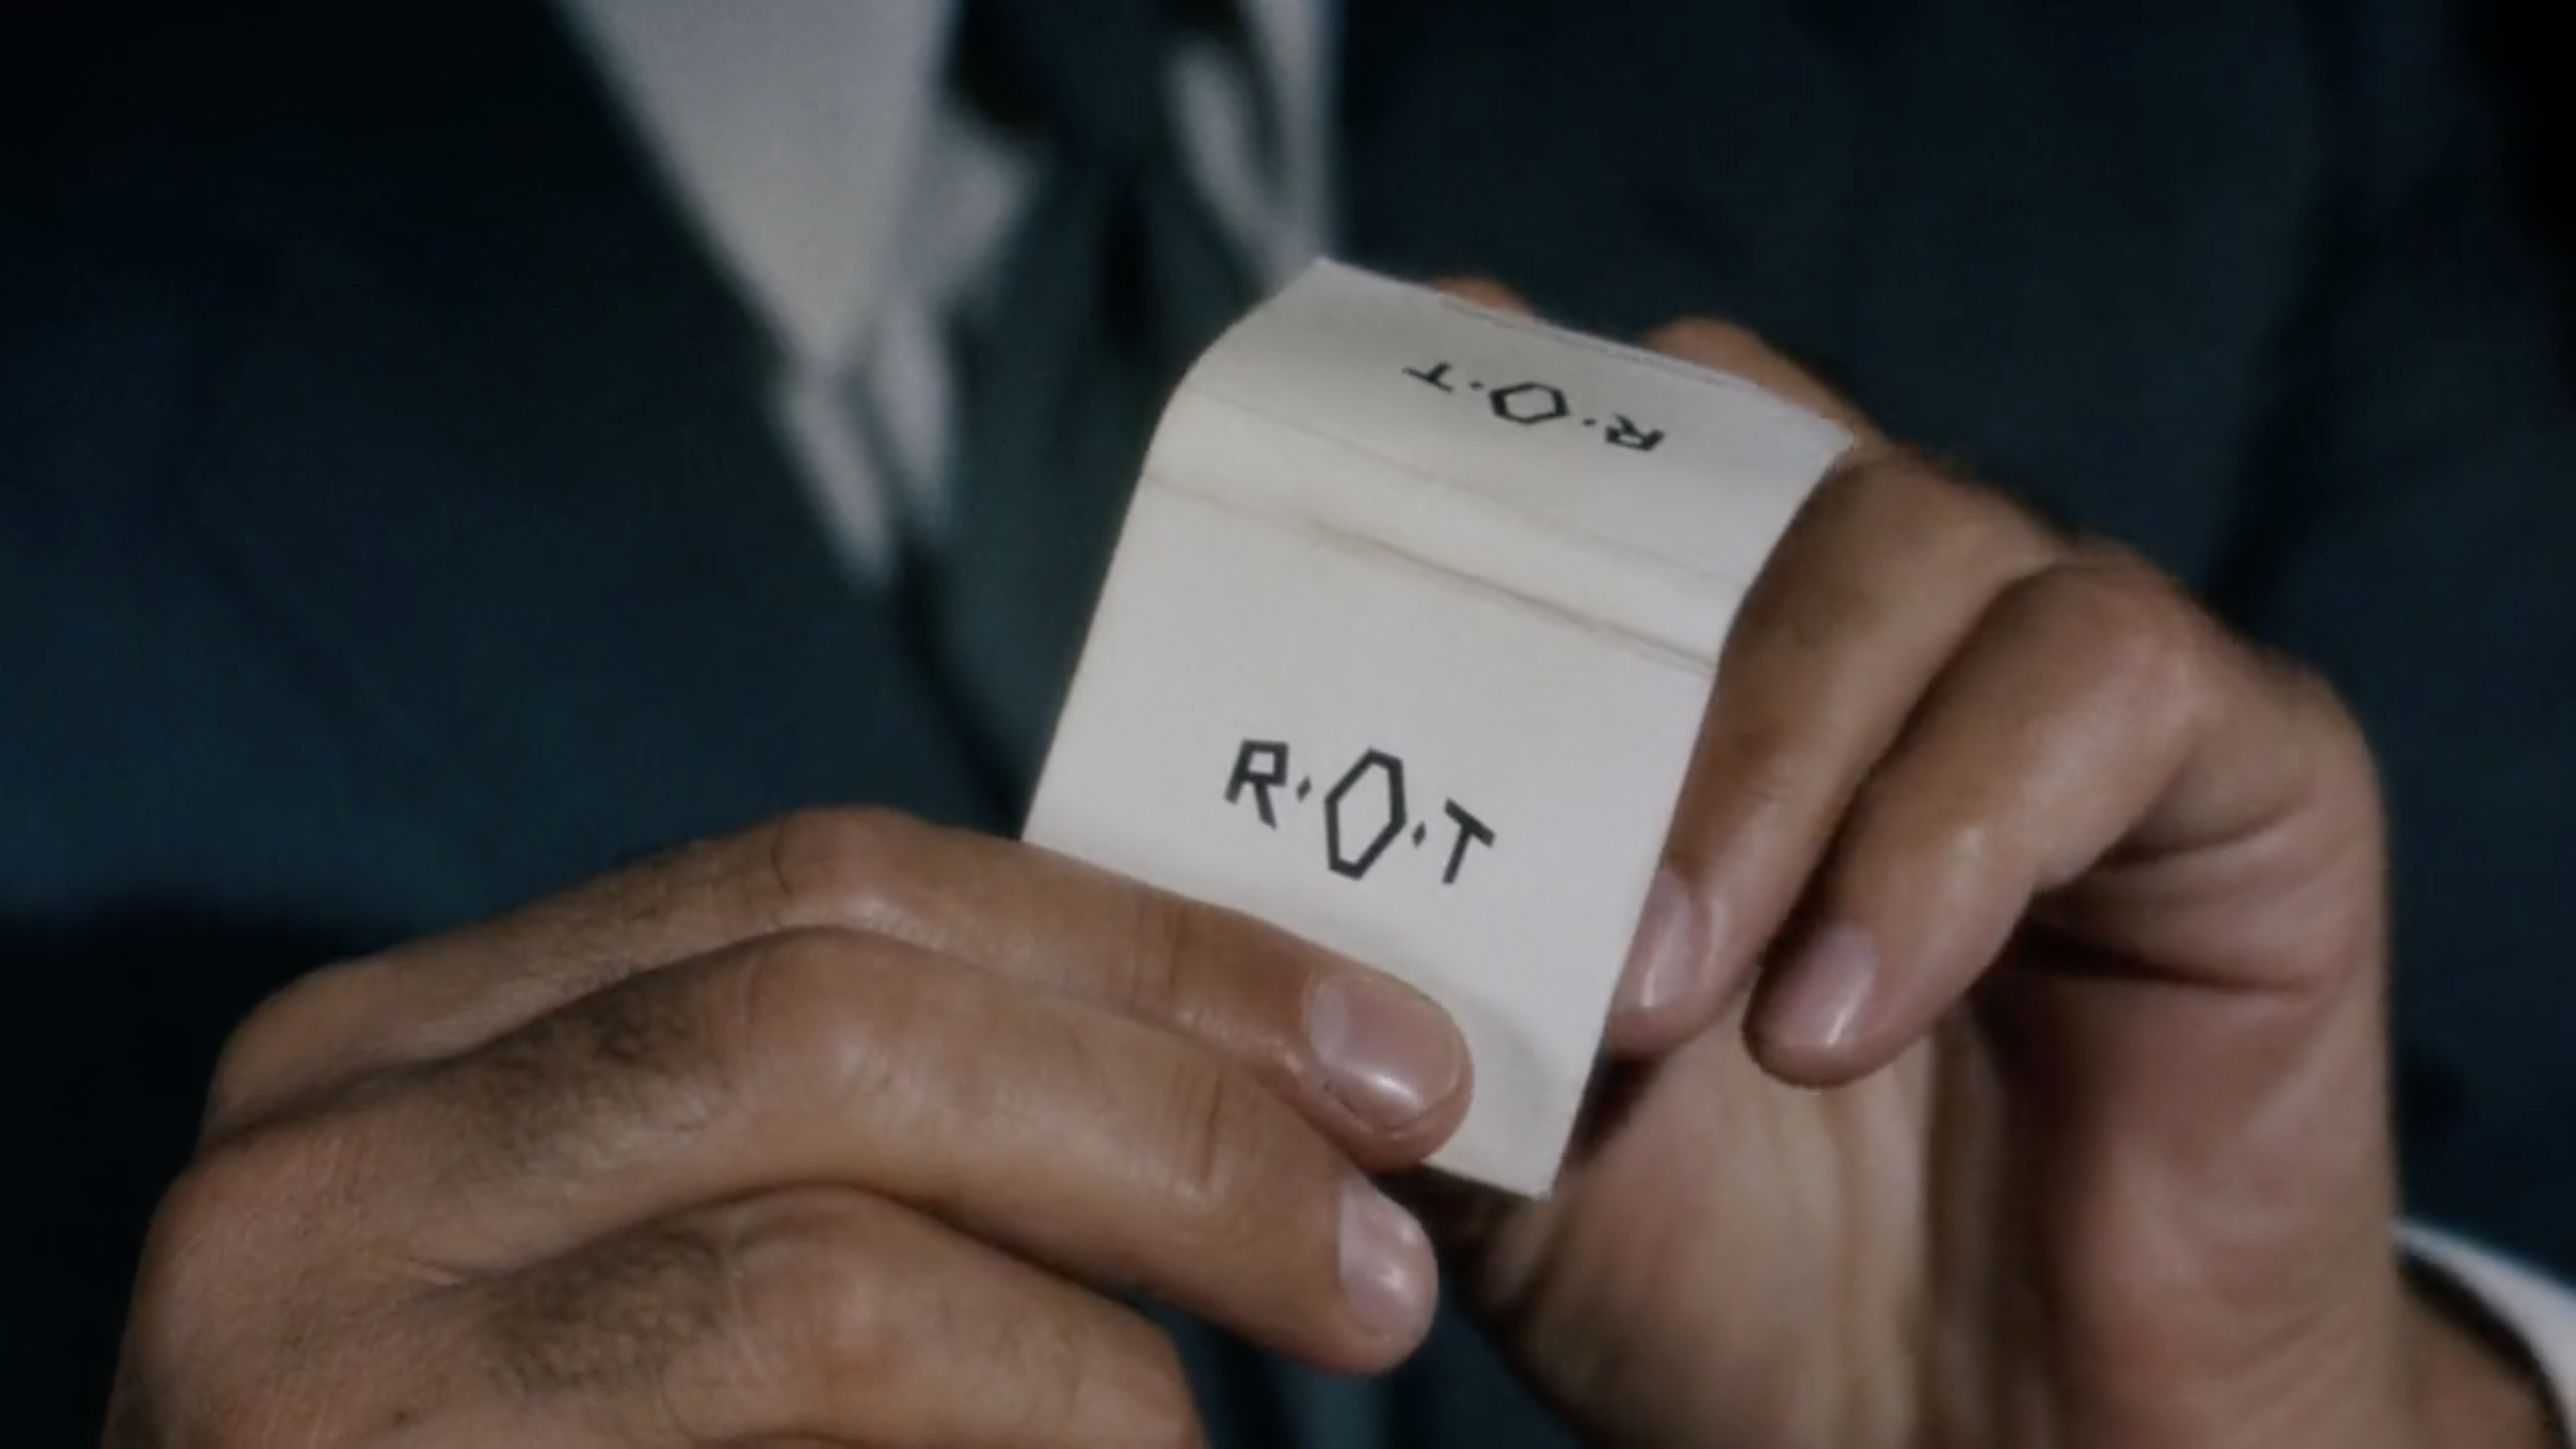 The R.O.T Matchbook From North by Northwest